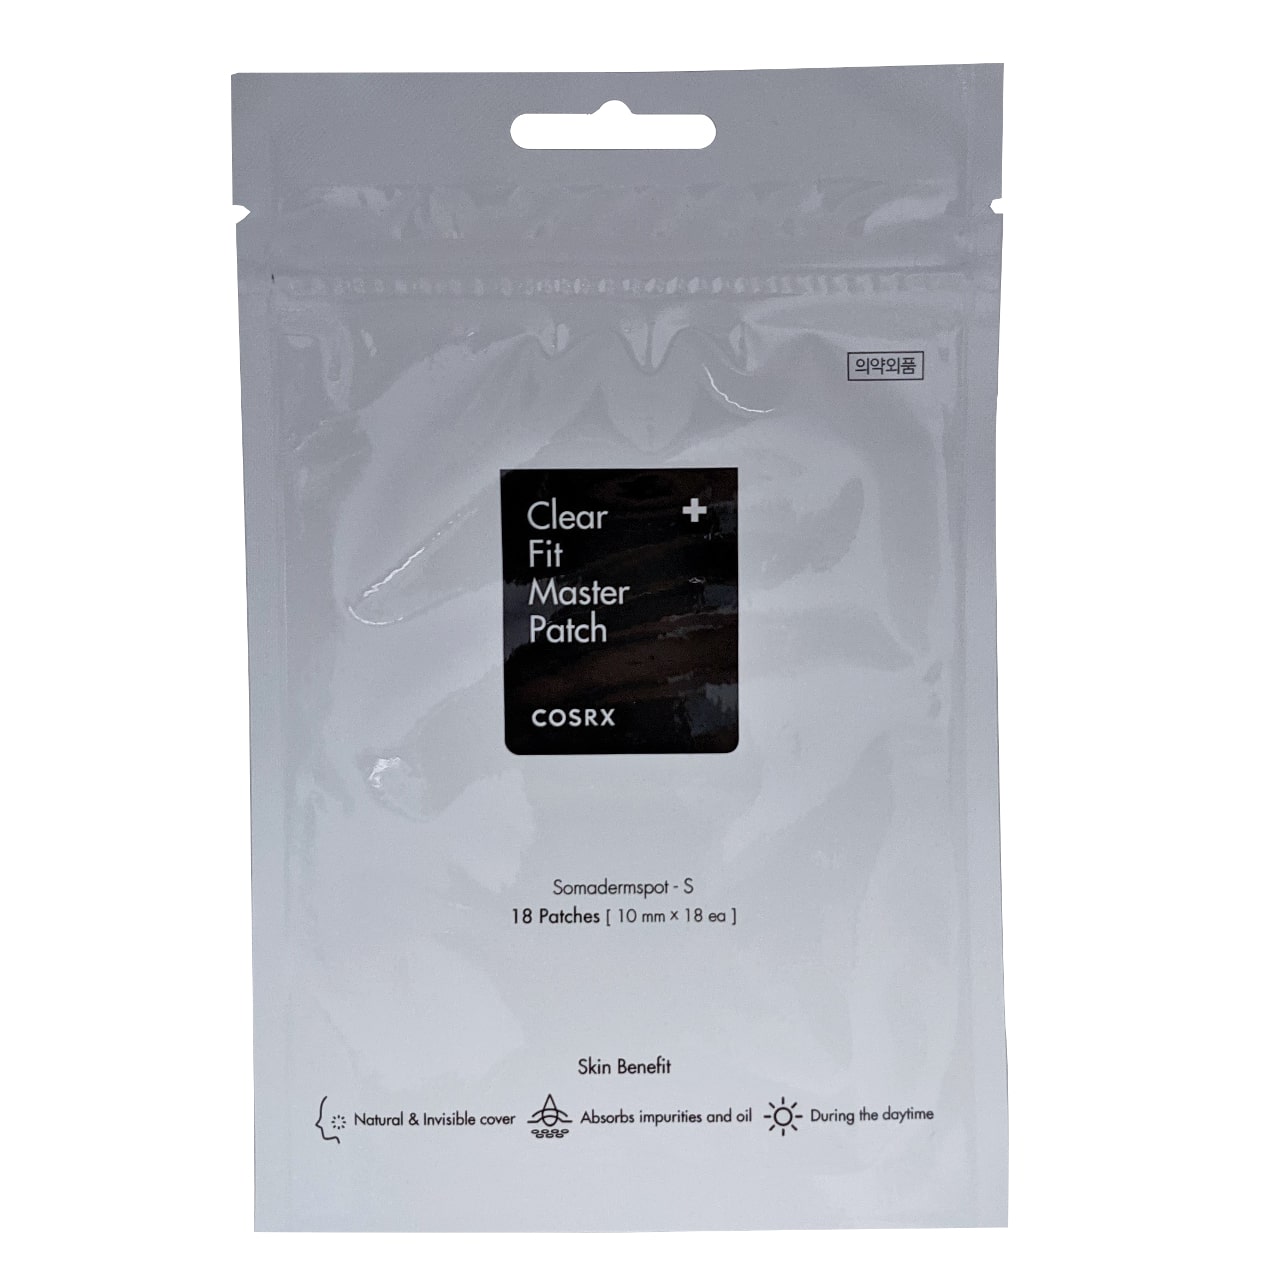 Product label for COSRX Clear Fit Master Patch